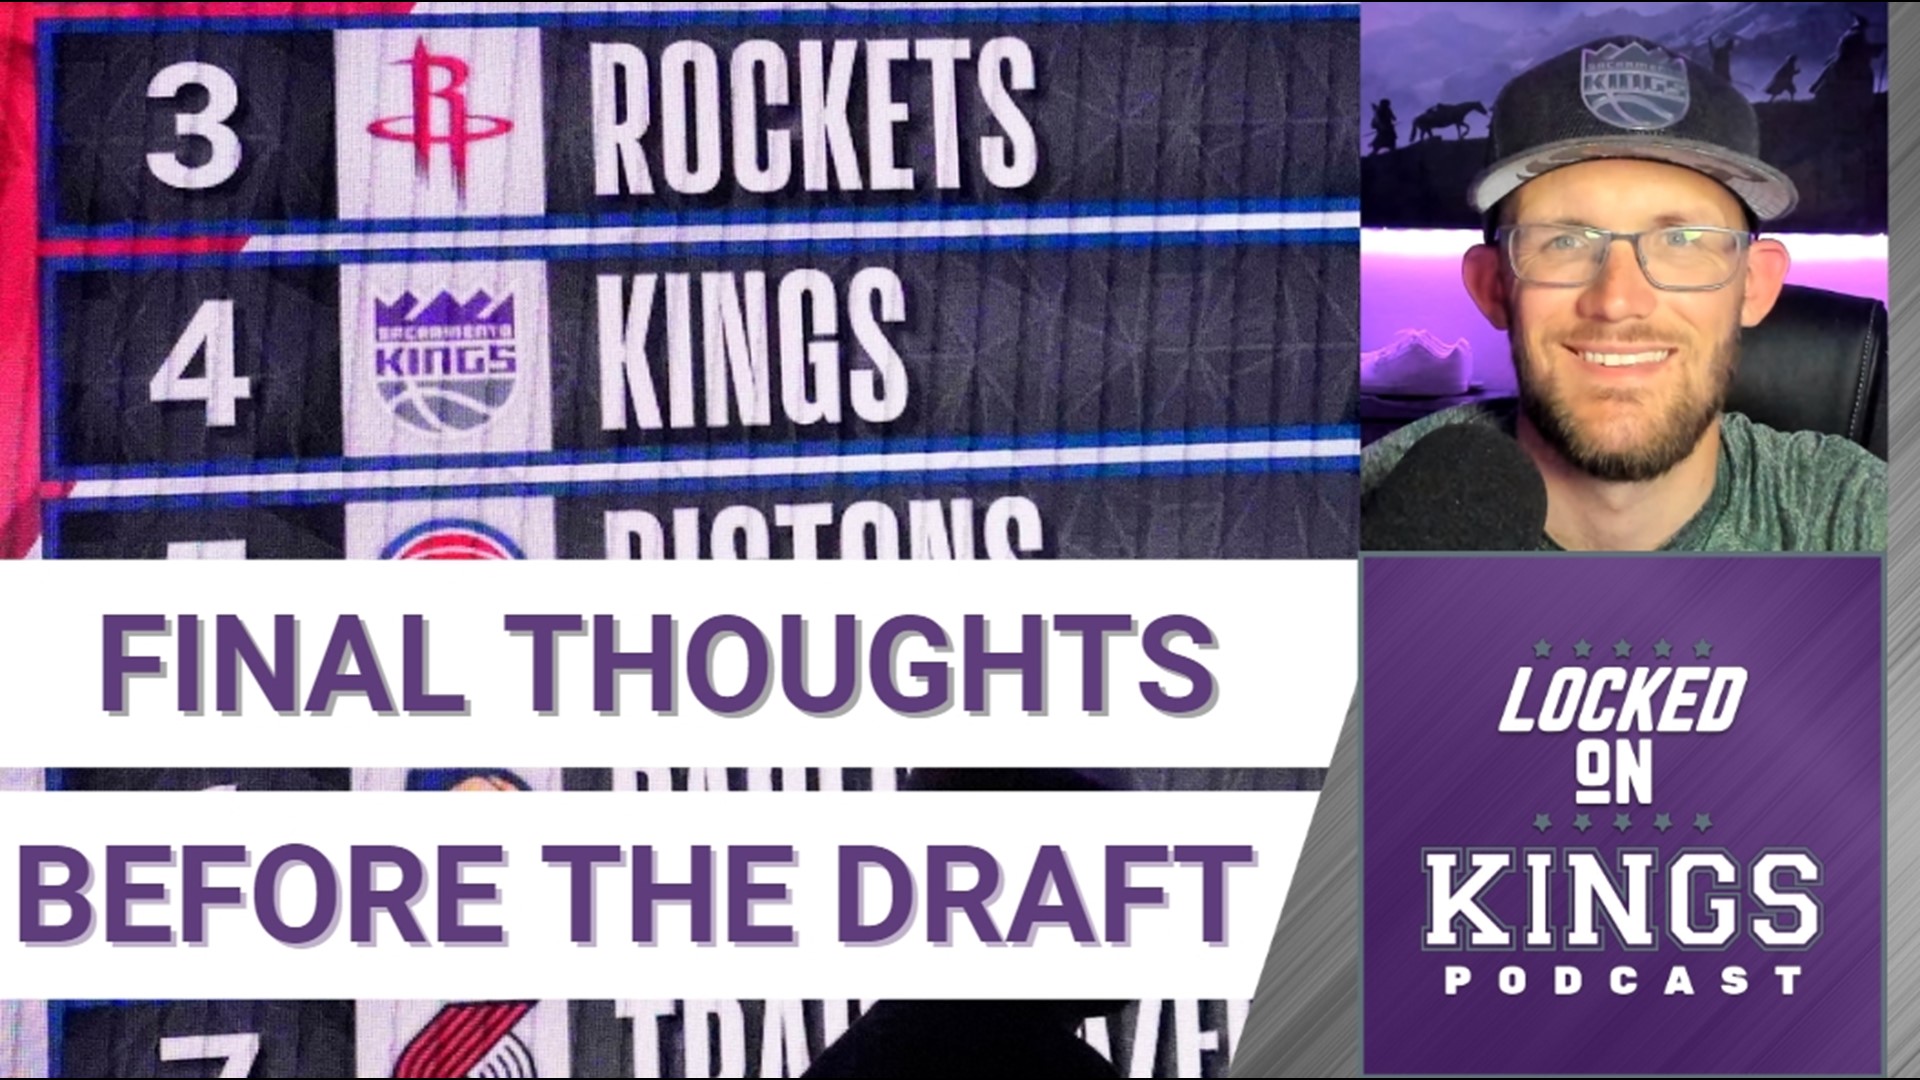 Matt George shares his final thoughts and predictions on what the Sacramento Kings will do in the 2022 NBA Draft.